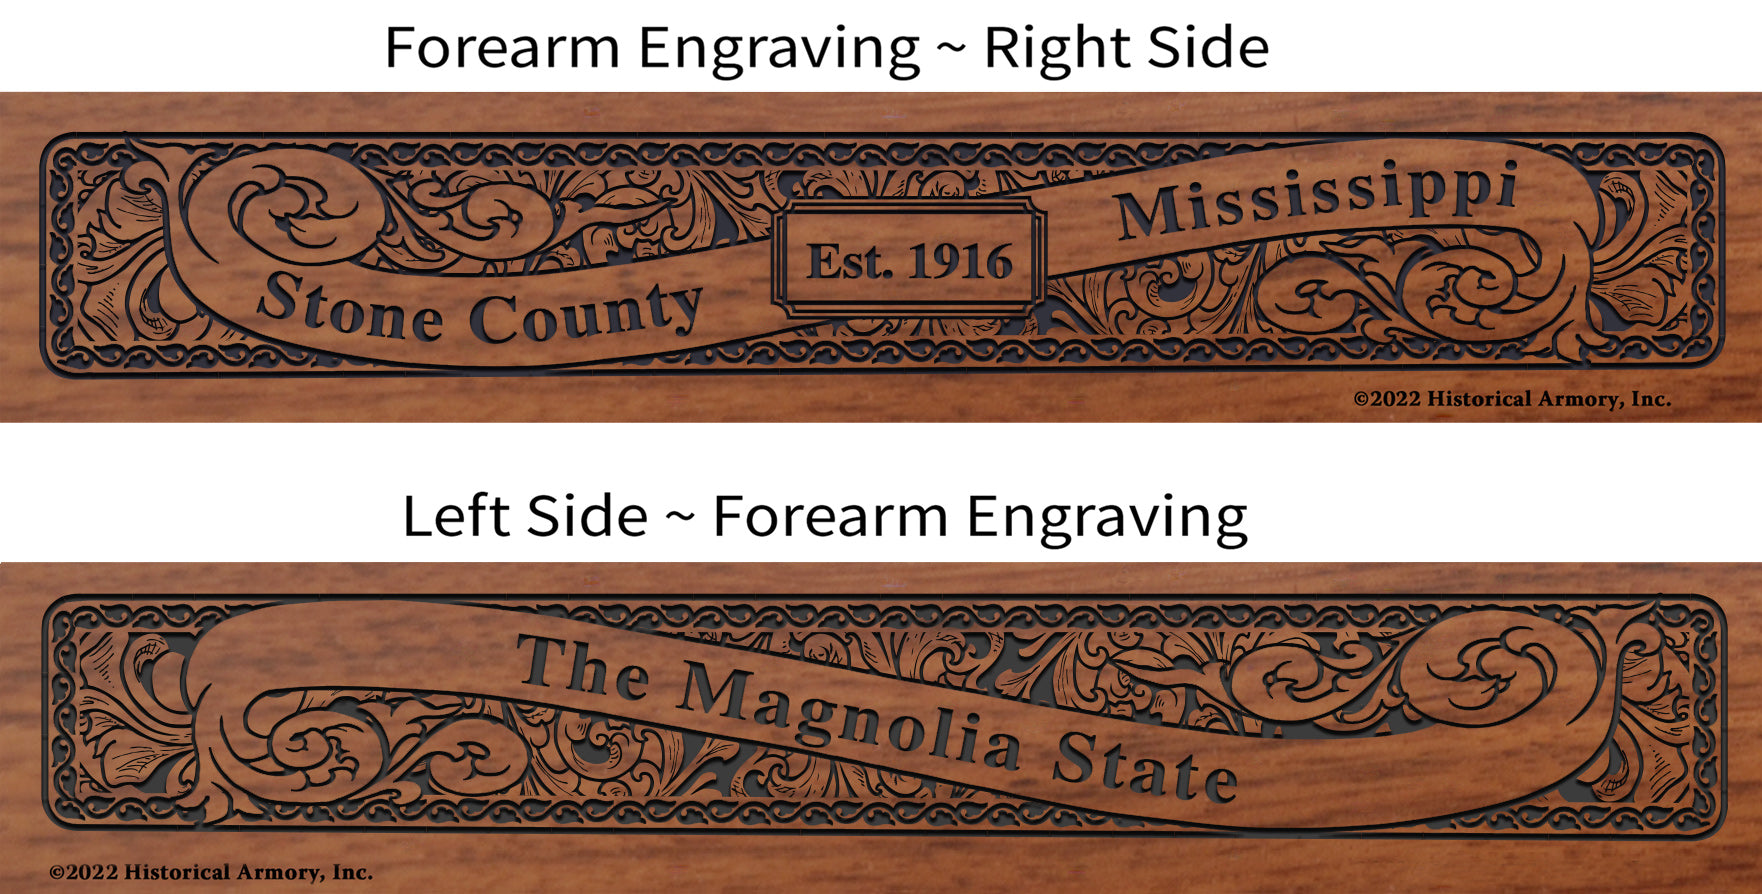 Stone County Mississippi Engraved Rifle Forearm